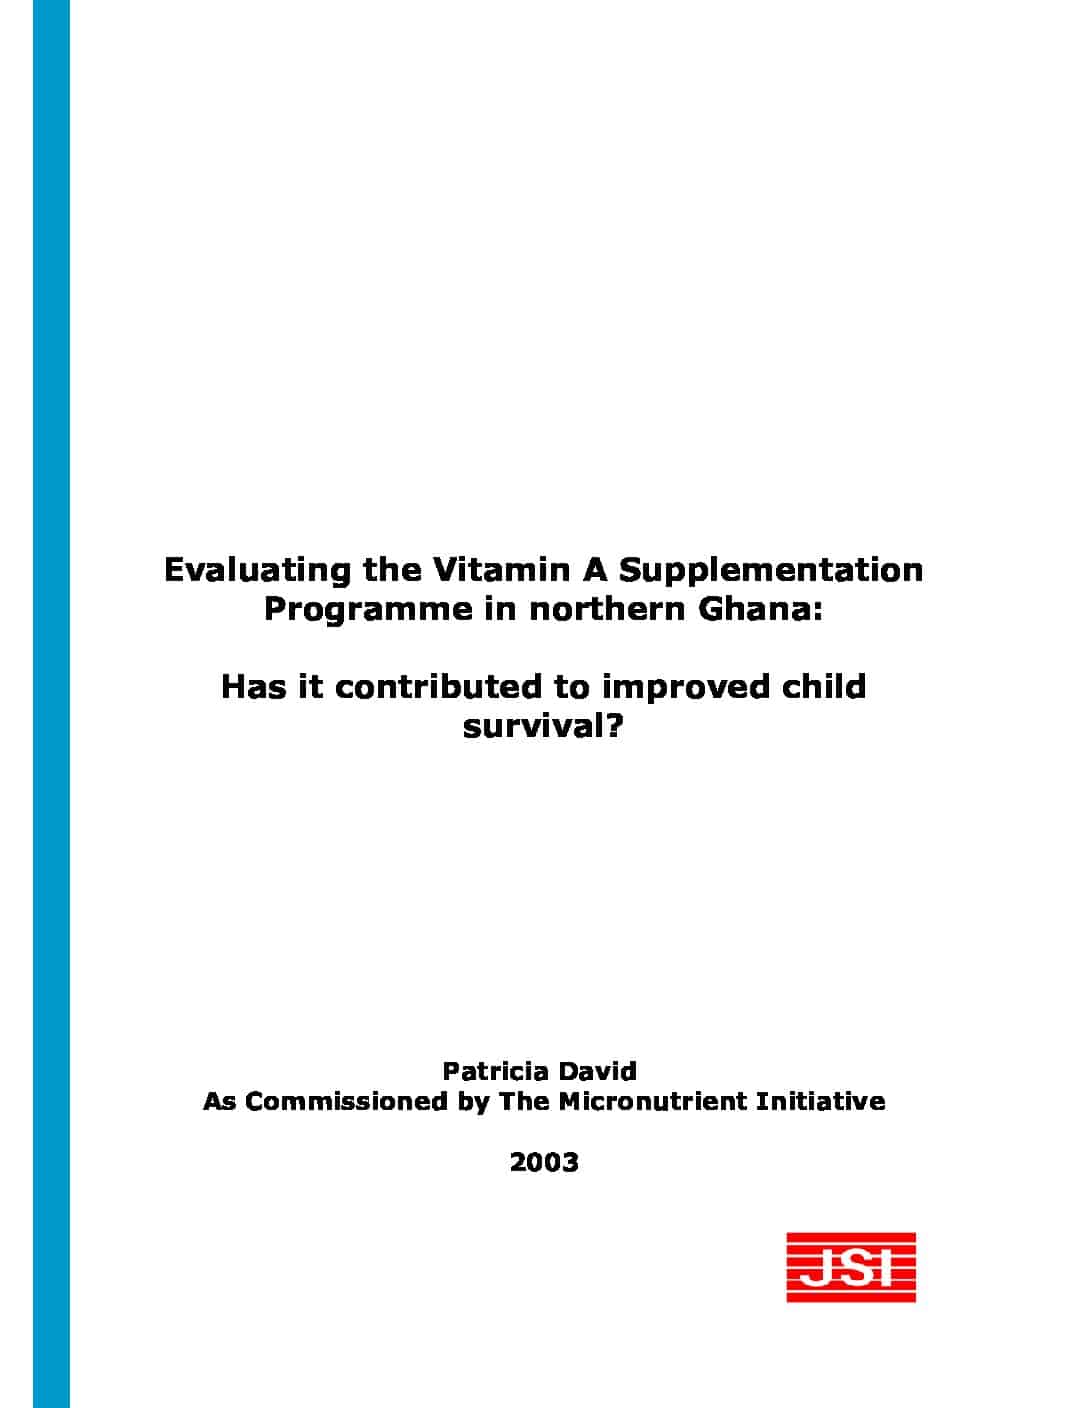 Evaluating the Vitamin A Supplementation Programme in northern Ghana: Has it contributed to improved child survival? thumbnail